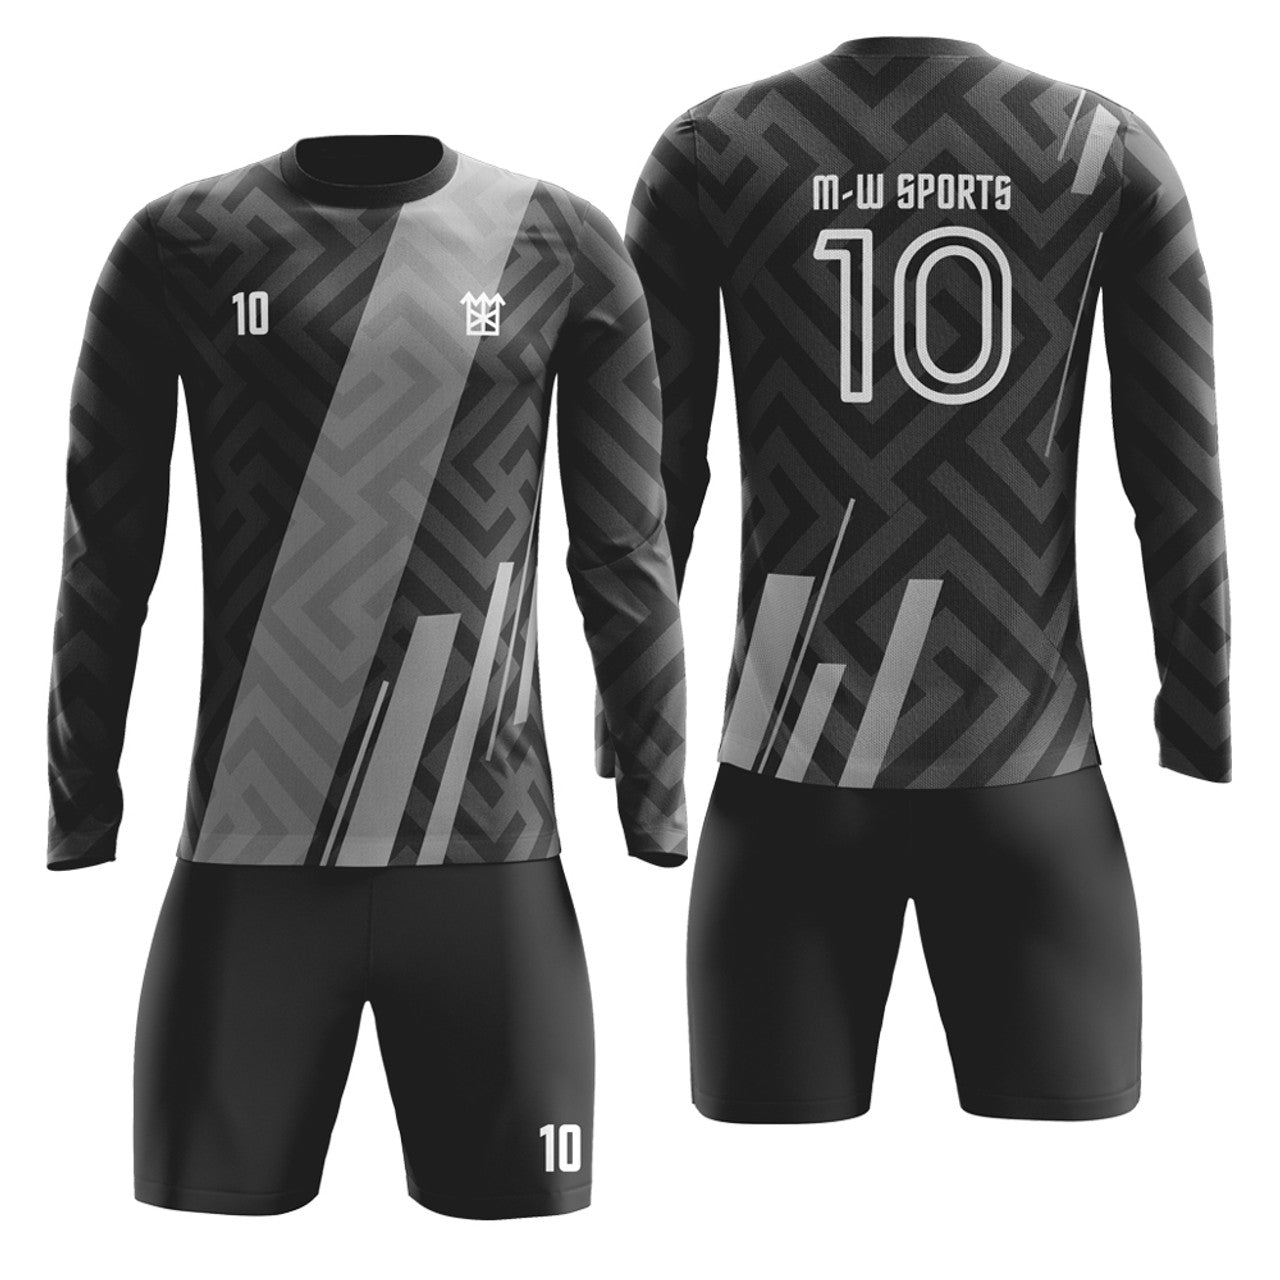 Custom Long Sleeve Soccer Shirt Football Goalkeeper Jersey with your name, number and logo.